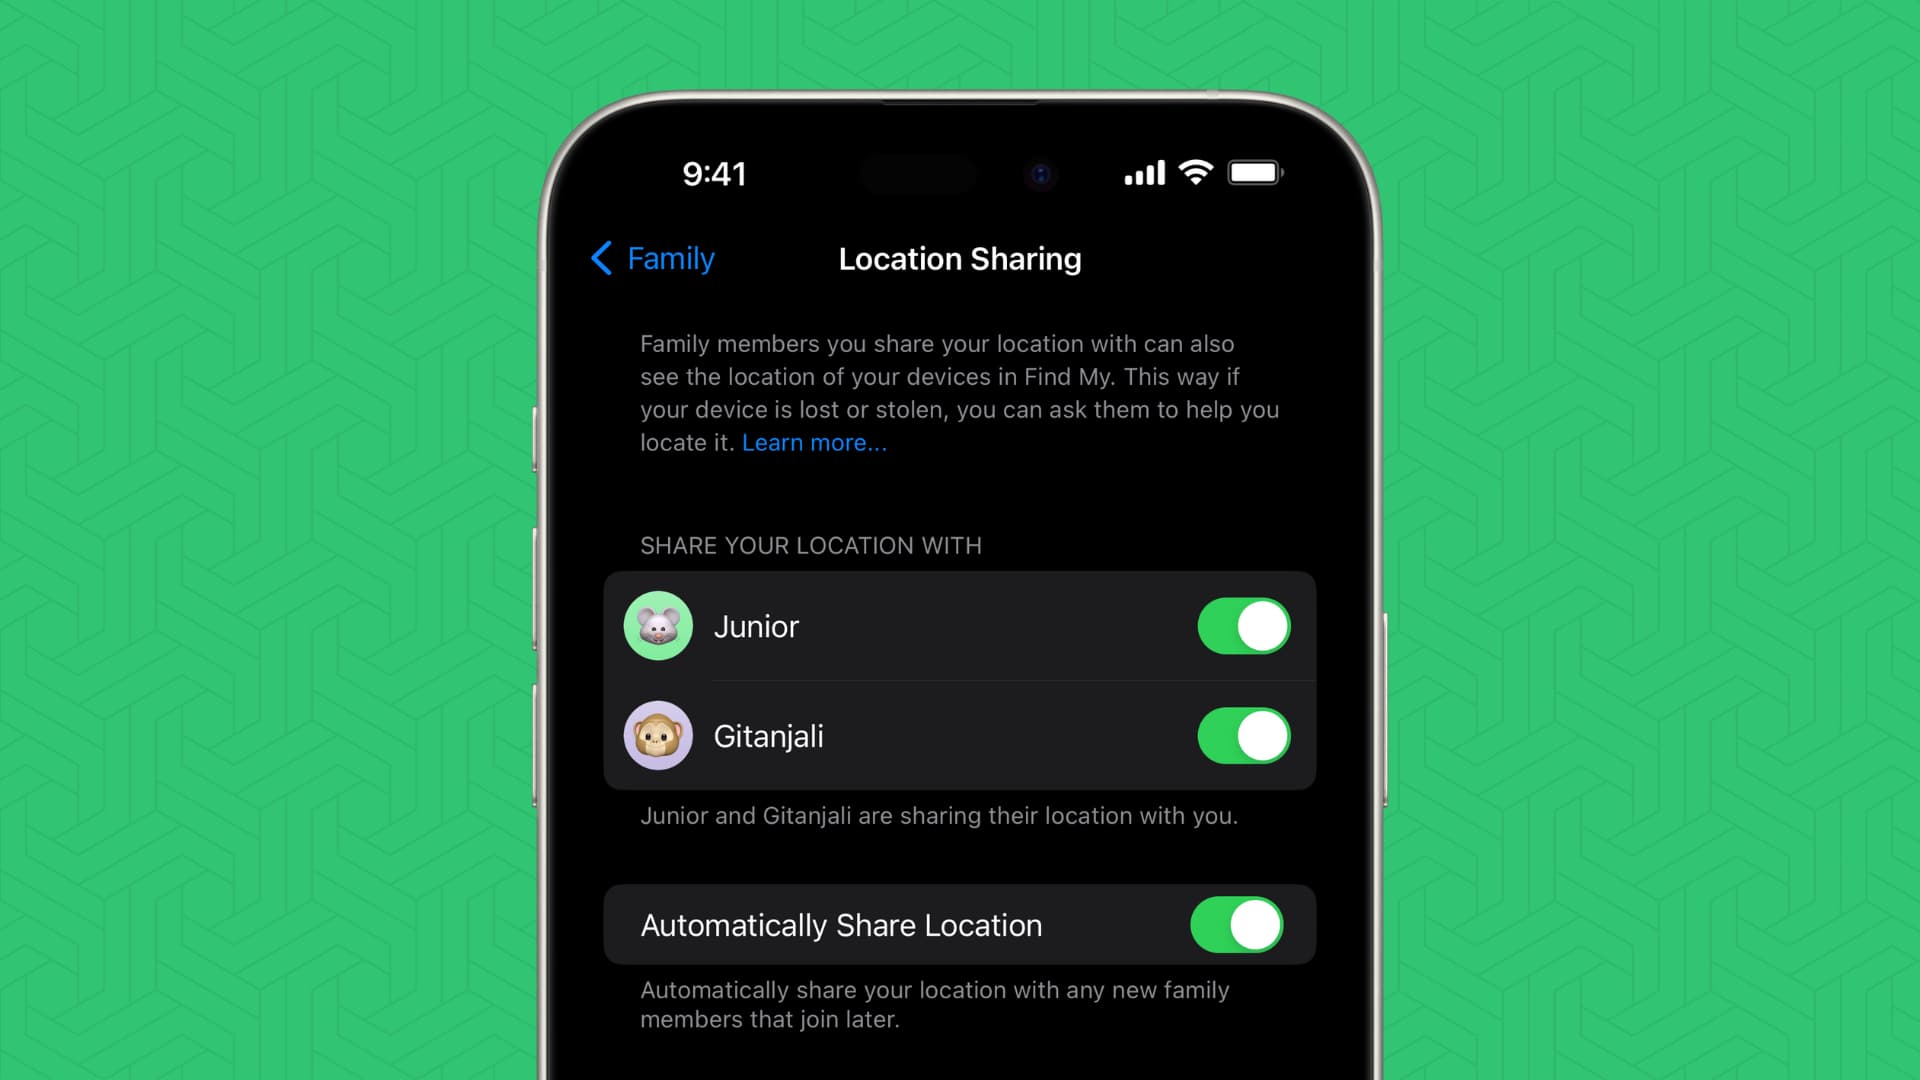 Family Location Sharing on iPhone